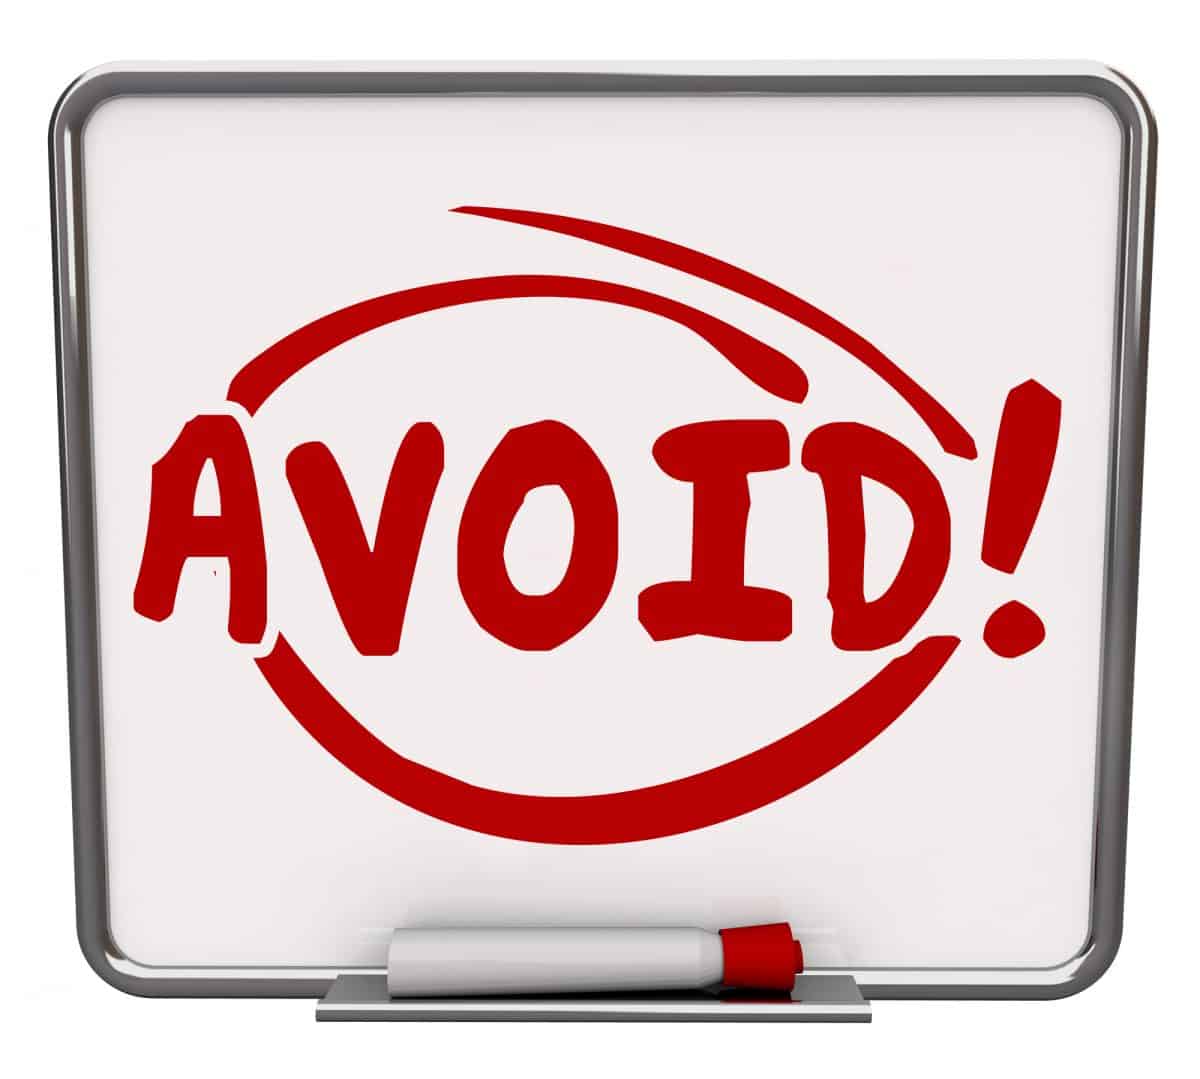 Avoid word written and circled on a dry erase board to illustrate a warning or danger sign of things to prevent as a precaution for safety and security